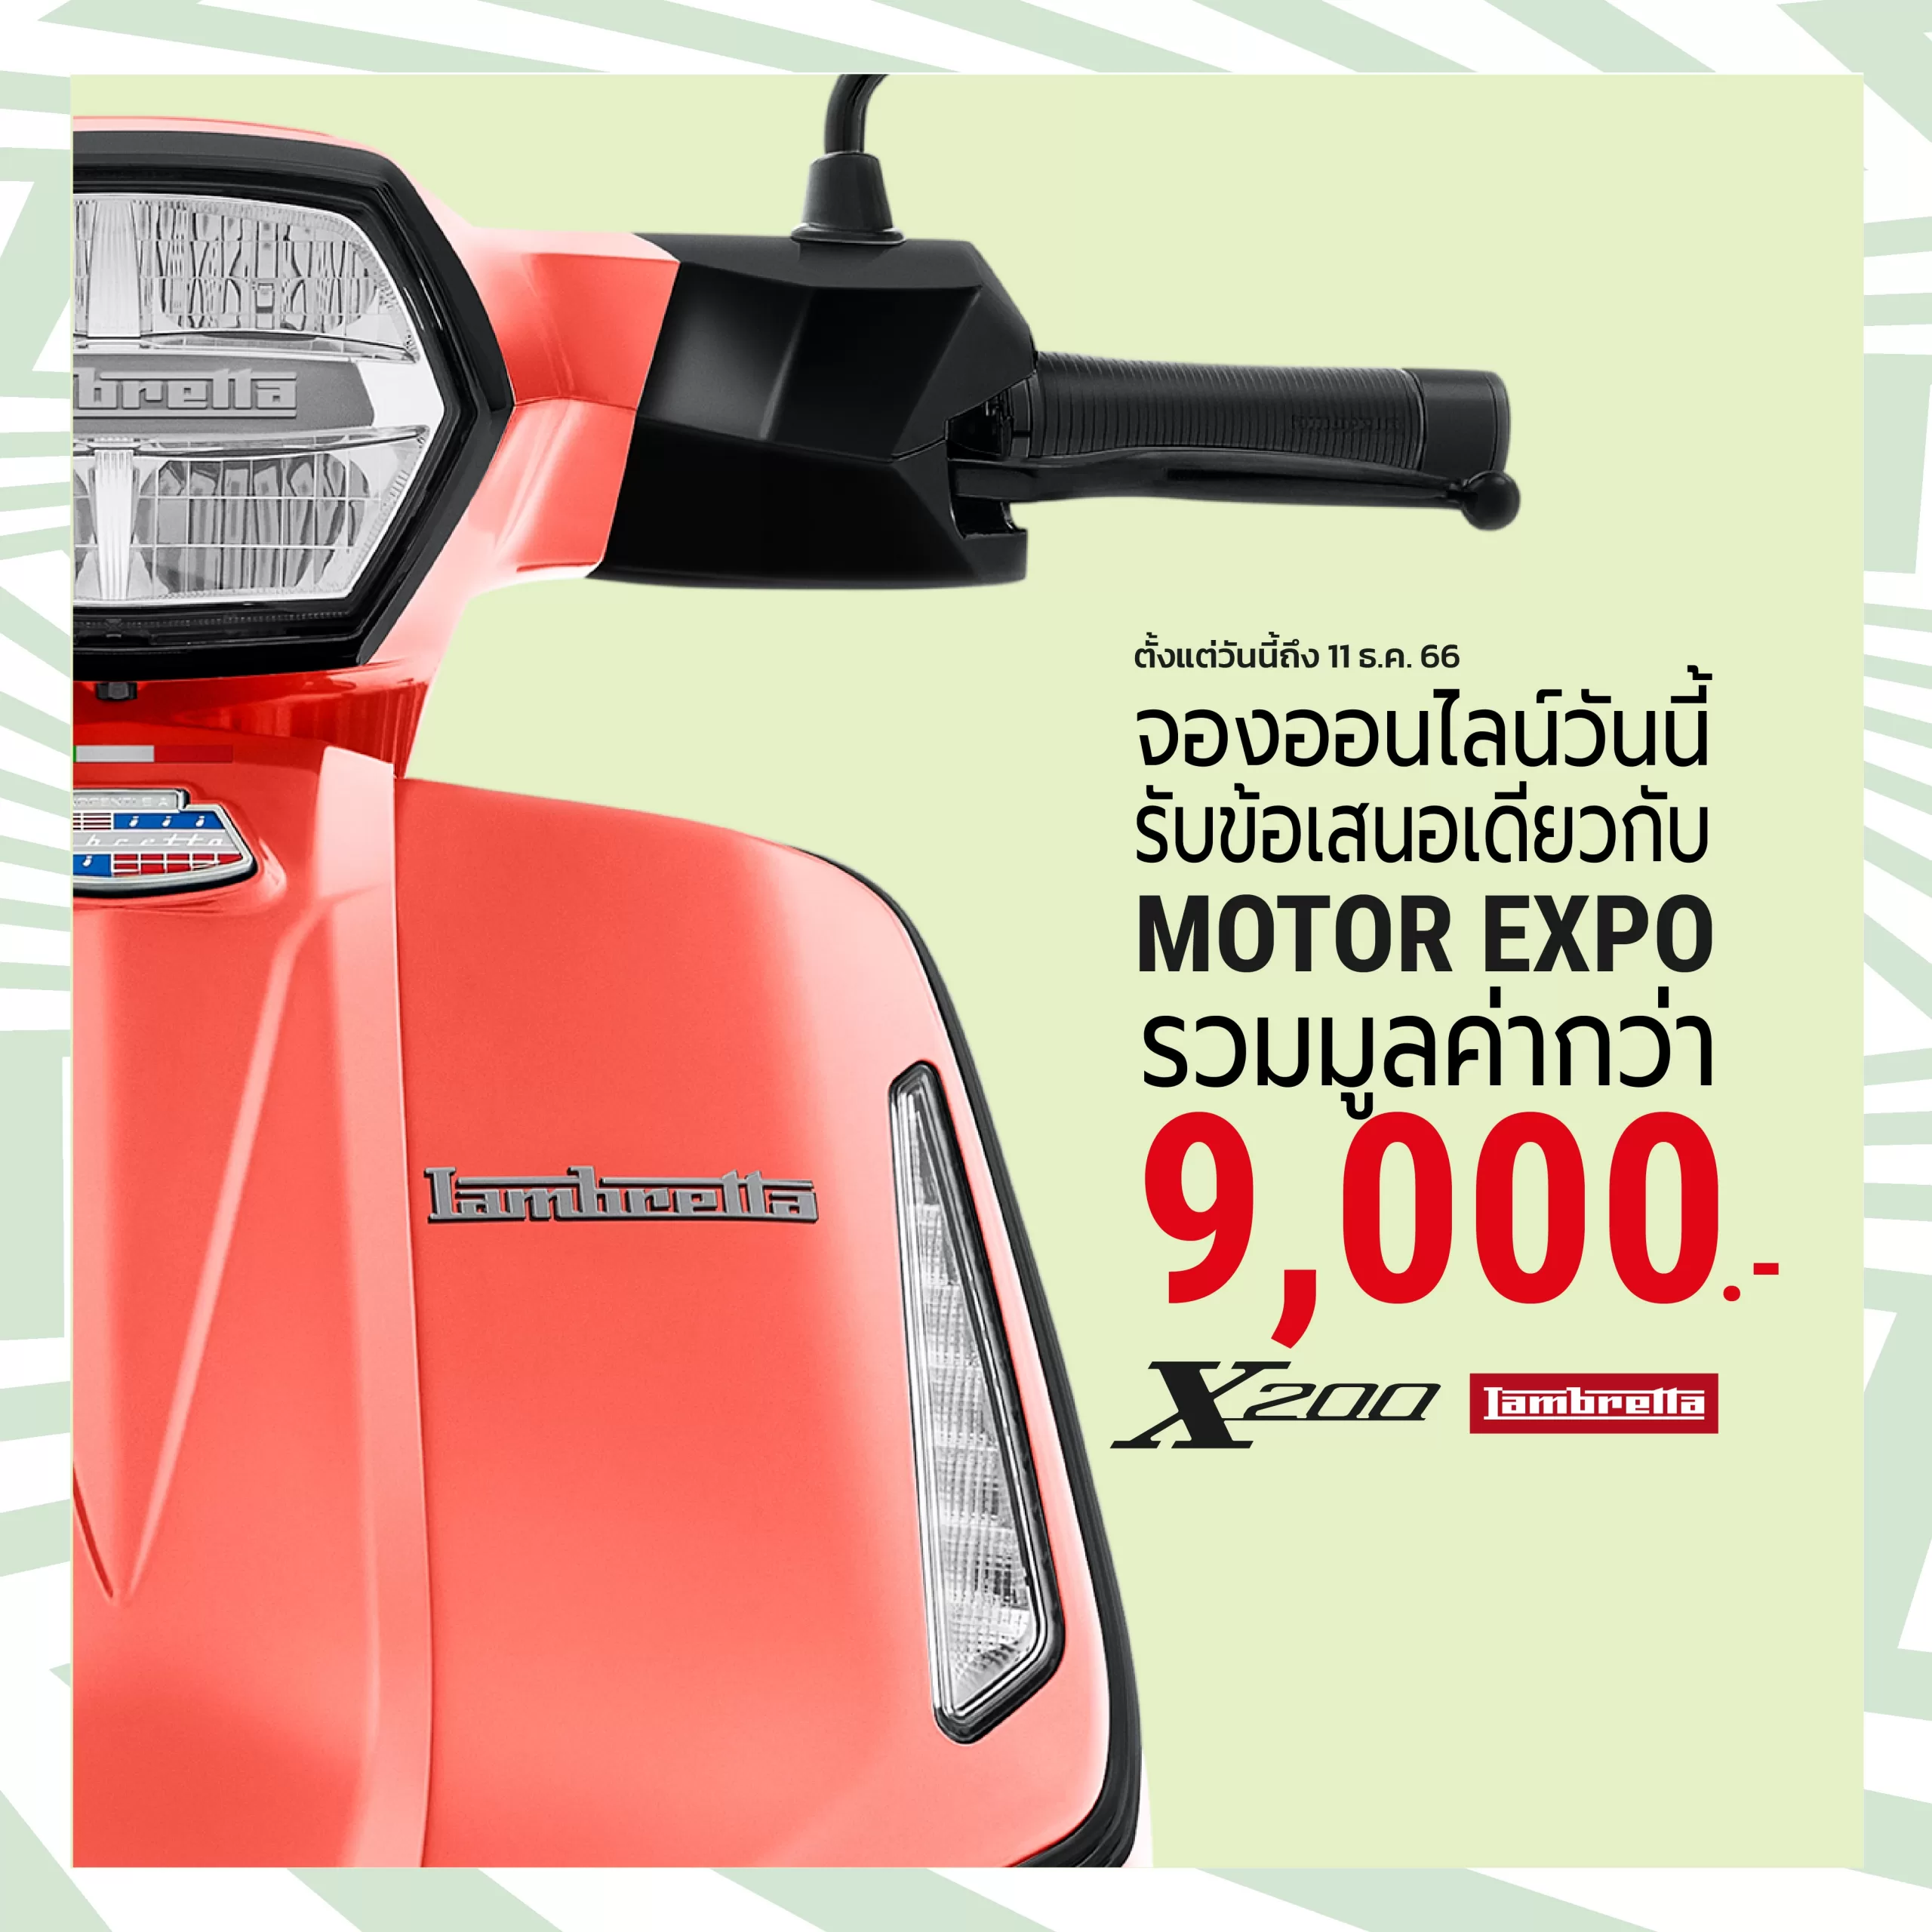 PROMOTION MOTOR EXPO